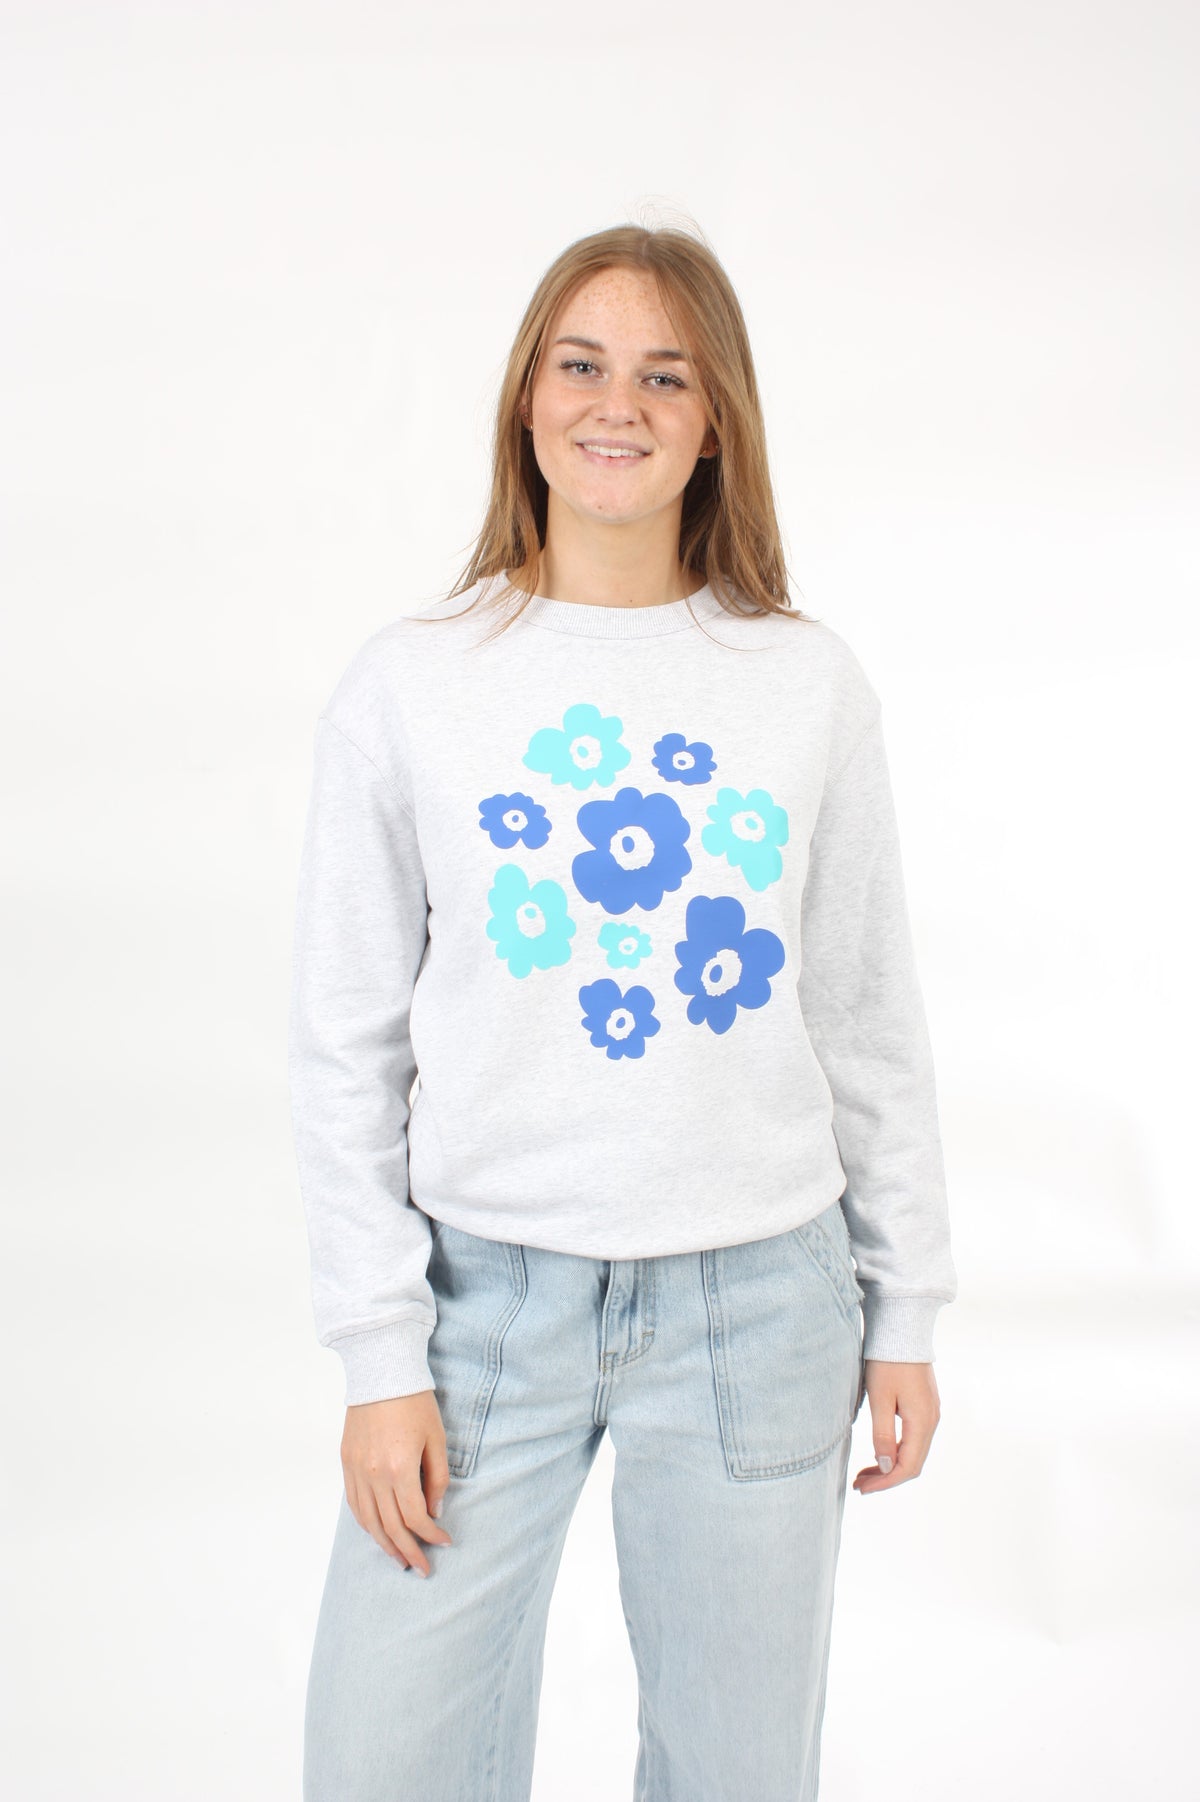 Crew - White Marle with Blue and Turquoise Poppy Bunch  - Pre Order 2 - 3 Weeks